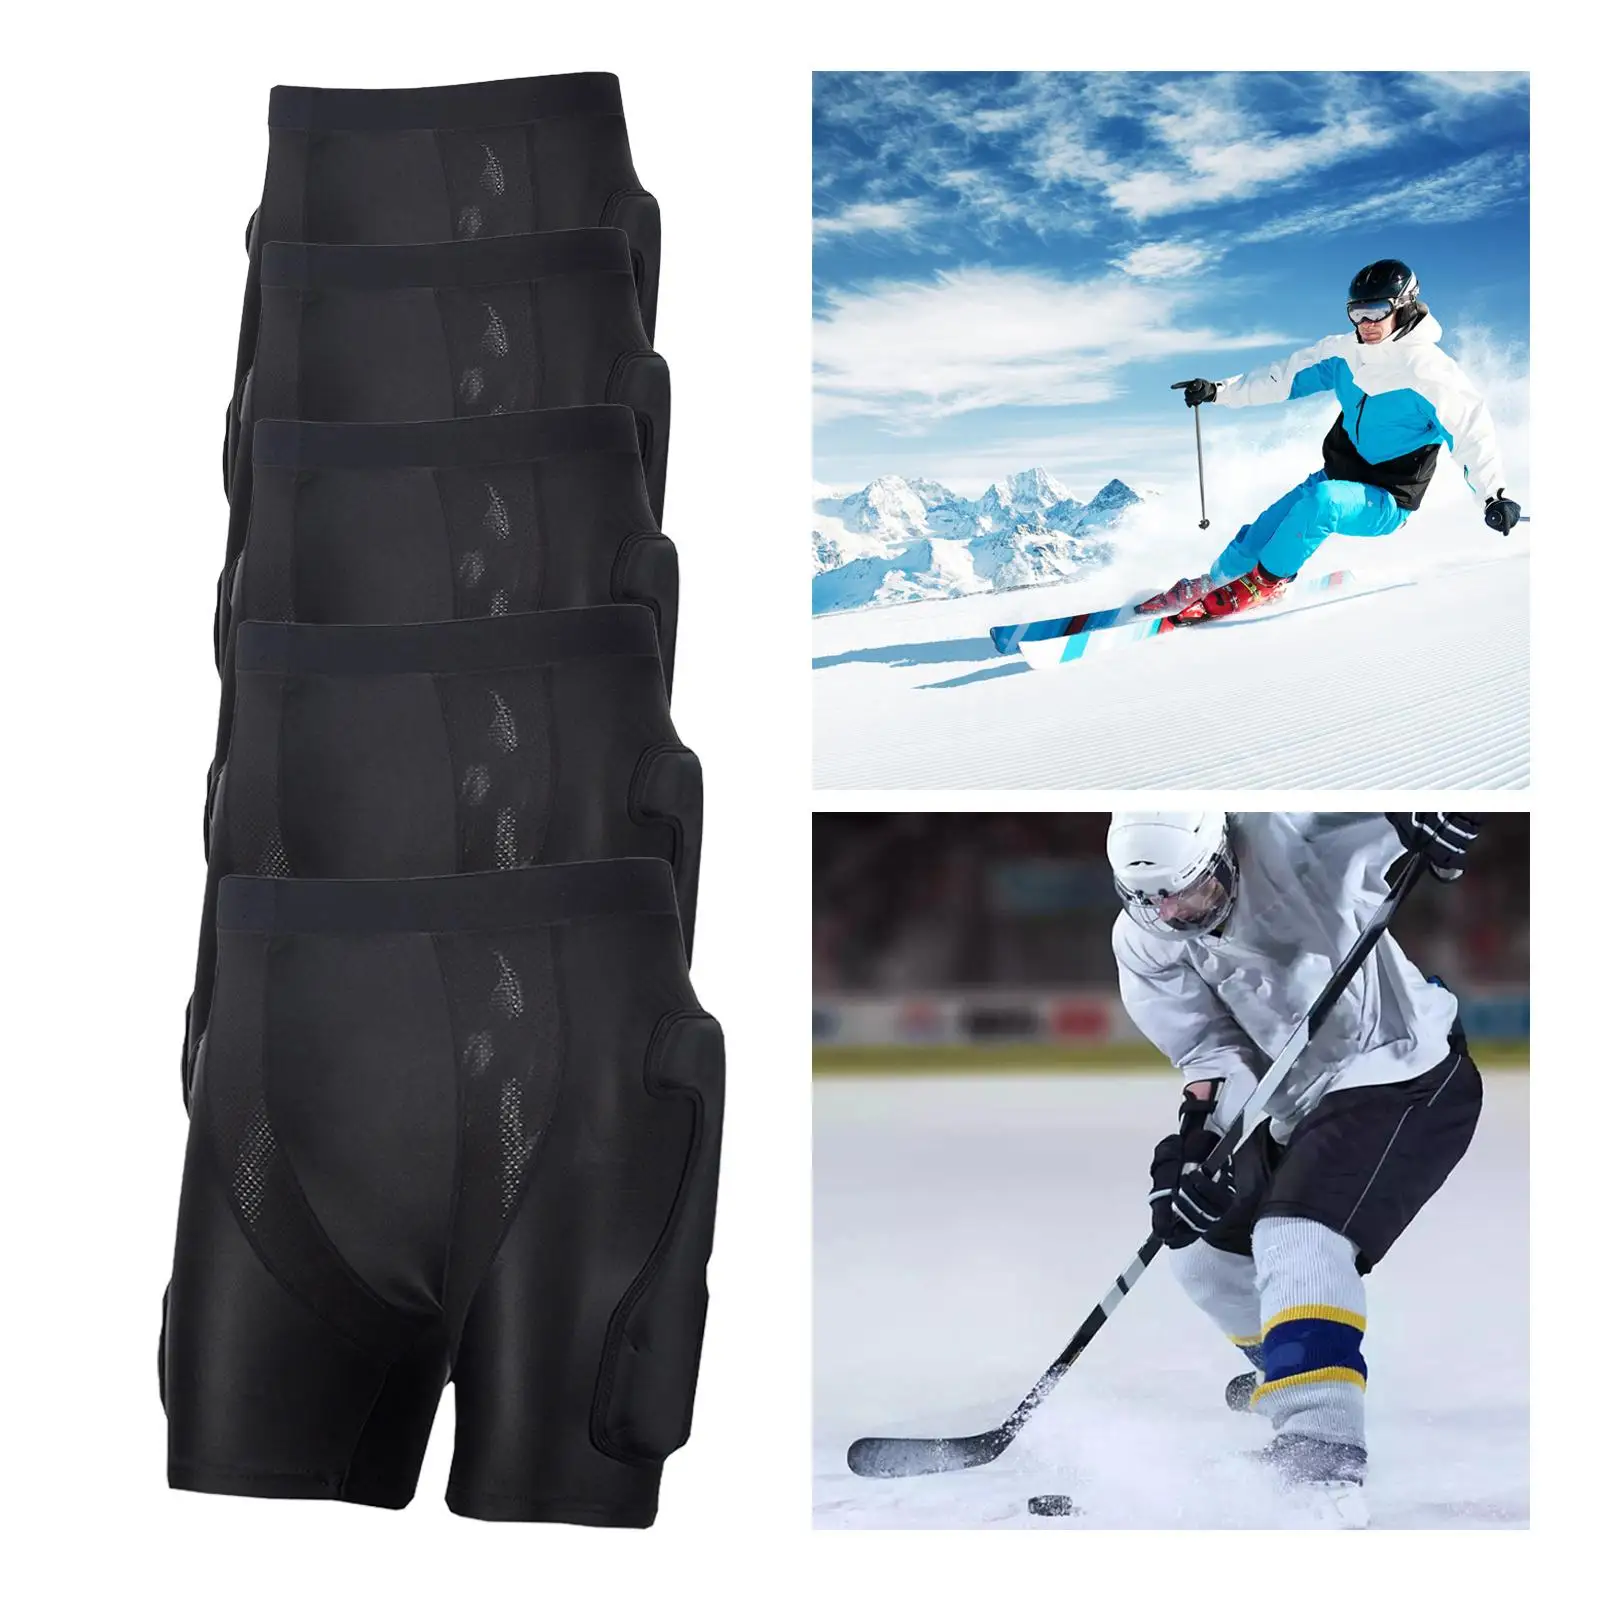 Protective Padded Shorts Skating Butt Pad Multifunction Pad 3D Protection Pants for Outdoor Sports Snowboard Skiing Skate Unisex